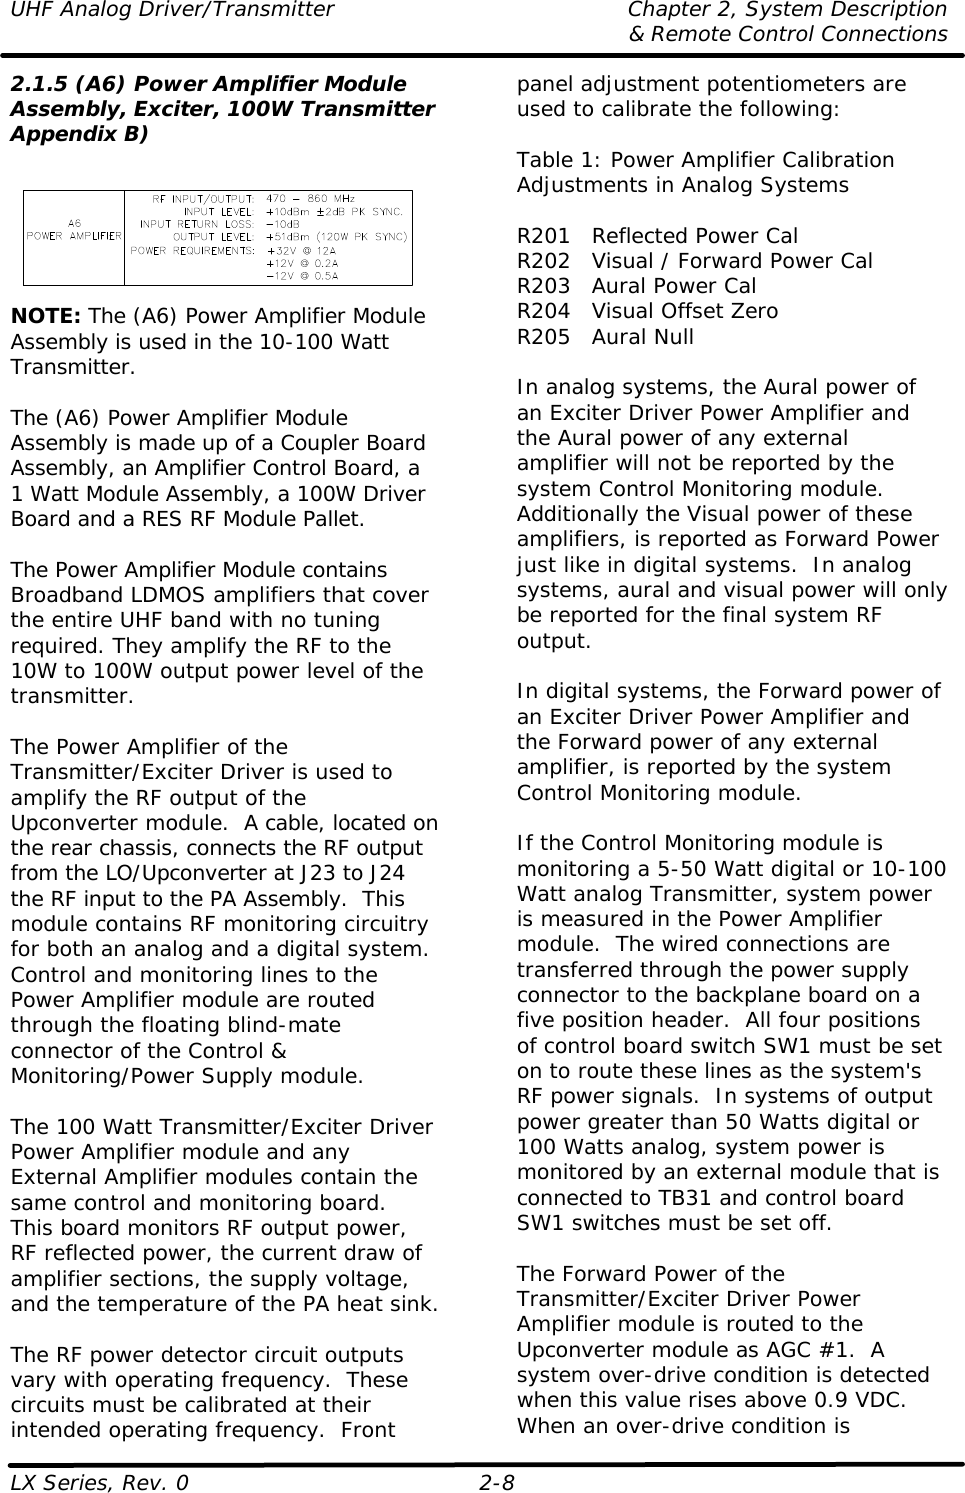 UHF Analog Driver/Transmitter Chapter 2, System Description  &amp; Remote Control Connections LX Series, Rev. 0 2-8 2.1.5 (A6) Power Amplifier Module Assembly, Exciter, 100W Transmitter  Appendix B)  NOTE: The (A6) Power Amplifier Module Assembly is used in the 10-100 Watt Transmitter.  The (A6) Power Amplifier Module Assembly is made up of a Coupler Board Assembly, an Amplifier Control Board, a 1 Watt Module Assembly, a 100W Driver Board and a RES RF Module Pallet.  The Power Amplifier Module contains Broadband LDMOS amplifiers that cover the entire UHF band with no tuning required. They amplify the RF to the 10W to 100W output power level of the transmitter.  The Power Amplifier of the Transmitter/Exciter Driver is used to amplify the RF output of the Upconverter module.  A cable, located on the rear chassis, connects the RF output from the LO/Upconverter at J23 to J24 the RF input to the PA Assembly.  This module contains RF monitoring circuitry for both an analog and a digital system.  Control and monitoring lines to the Power Amplifier module are routed through the floating blind-mate connector of the Control &amp; Monitoring/Power Supply module.  The 100 Watt Transmitter/Exciter Driver Power Amplifier module and any External Amplifier modules contain the same control and monitoring board.  This board monitors RF output power, RF reflected power, the current draw of amplifier sections, the supply voltage, and the temperature of the PA heat sink.  The RF power detector circuit outputs vary with operating frequency.  These circuits must be calibrated at their intended operating frequency.  Front panel adjustment potentiometers are used to calibrate the following:  Table 1: Power Amplifier Calibration Adjustments in Analog Systems  R201 Reflected Power Cal R202 Visual / Forward Power Cal R203 Aural Power Cal R204 Visual Offset Zero R205 Aural Null  In analog systems, the Aural power of an Exciter Driver Power Amplifier and the Aural power of any external amplifier will not be reported by the system Control Monitoring module.  Additionally the Visual power of these amplifiers, is reported as Forward Power just like in digital systems.  In analog systems, aural and visual power will only be reported for the final system RF output.    In digital systems, the Forward power of an Exciter Driver Power Amplifier and the Forward power of any external amplifier, is reported by the system Control Monitoring module.   If the Control Monitoring module is monitoring a 5-50 Watt digital or 10-100 Watt analog Transmitter, system power is measured in the Power Amplifier module.  The wired connections are transferred through the power supply connector to the backplane board on a five position header.  All four positions of control board switch SW1 must be set on to route these lines as the system&apos;s RF power signals.  In systems of output power greater than 50 Watts digital or 100 Watts analog, system power is monitored by an external module that is connected to TB31 and control board SW1 switches must be set off.   The Forward Power of the Transmitter/Exciter Driver Power Amplifier module is routed to the Upconverter module as AGC #1.  A system over-drive condition is detected when this value rises above 0.9 VDC.  When an over-drive condition is 